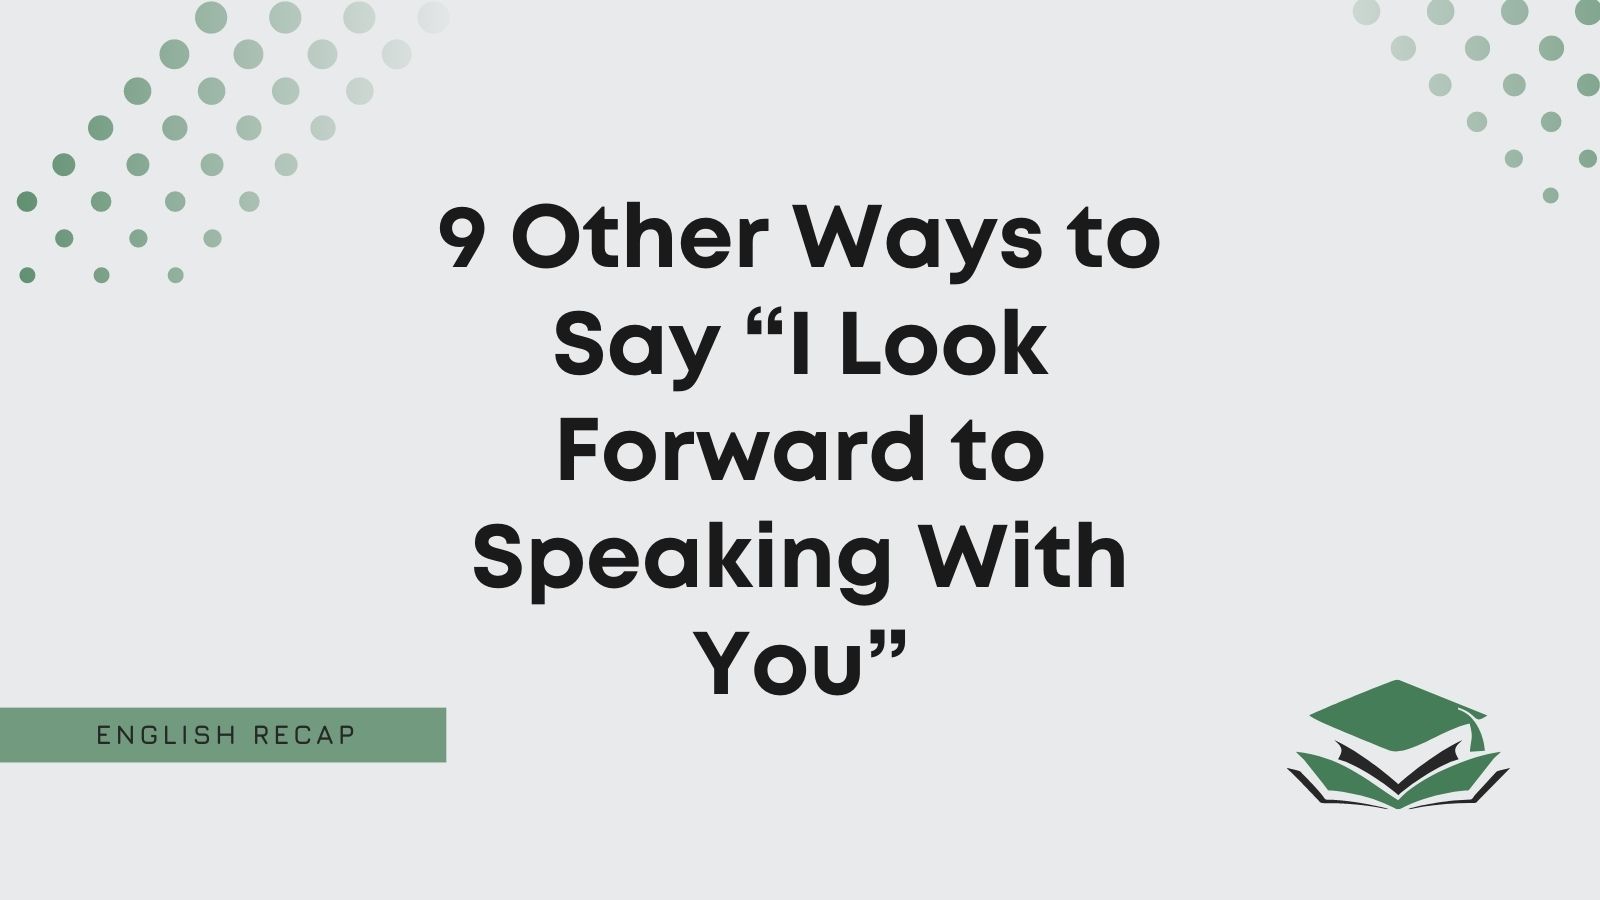 9 Other Ways to Say “I Look Forward to Speaking With You” - English Recap